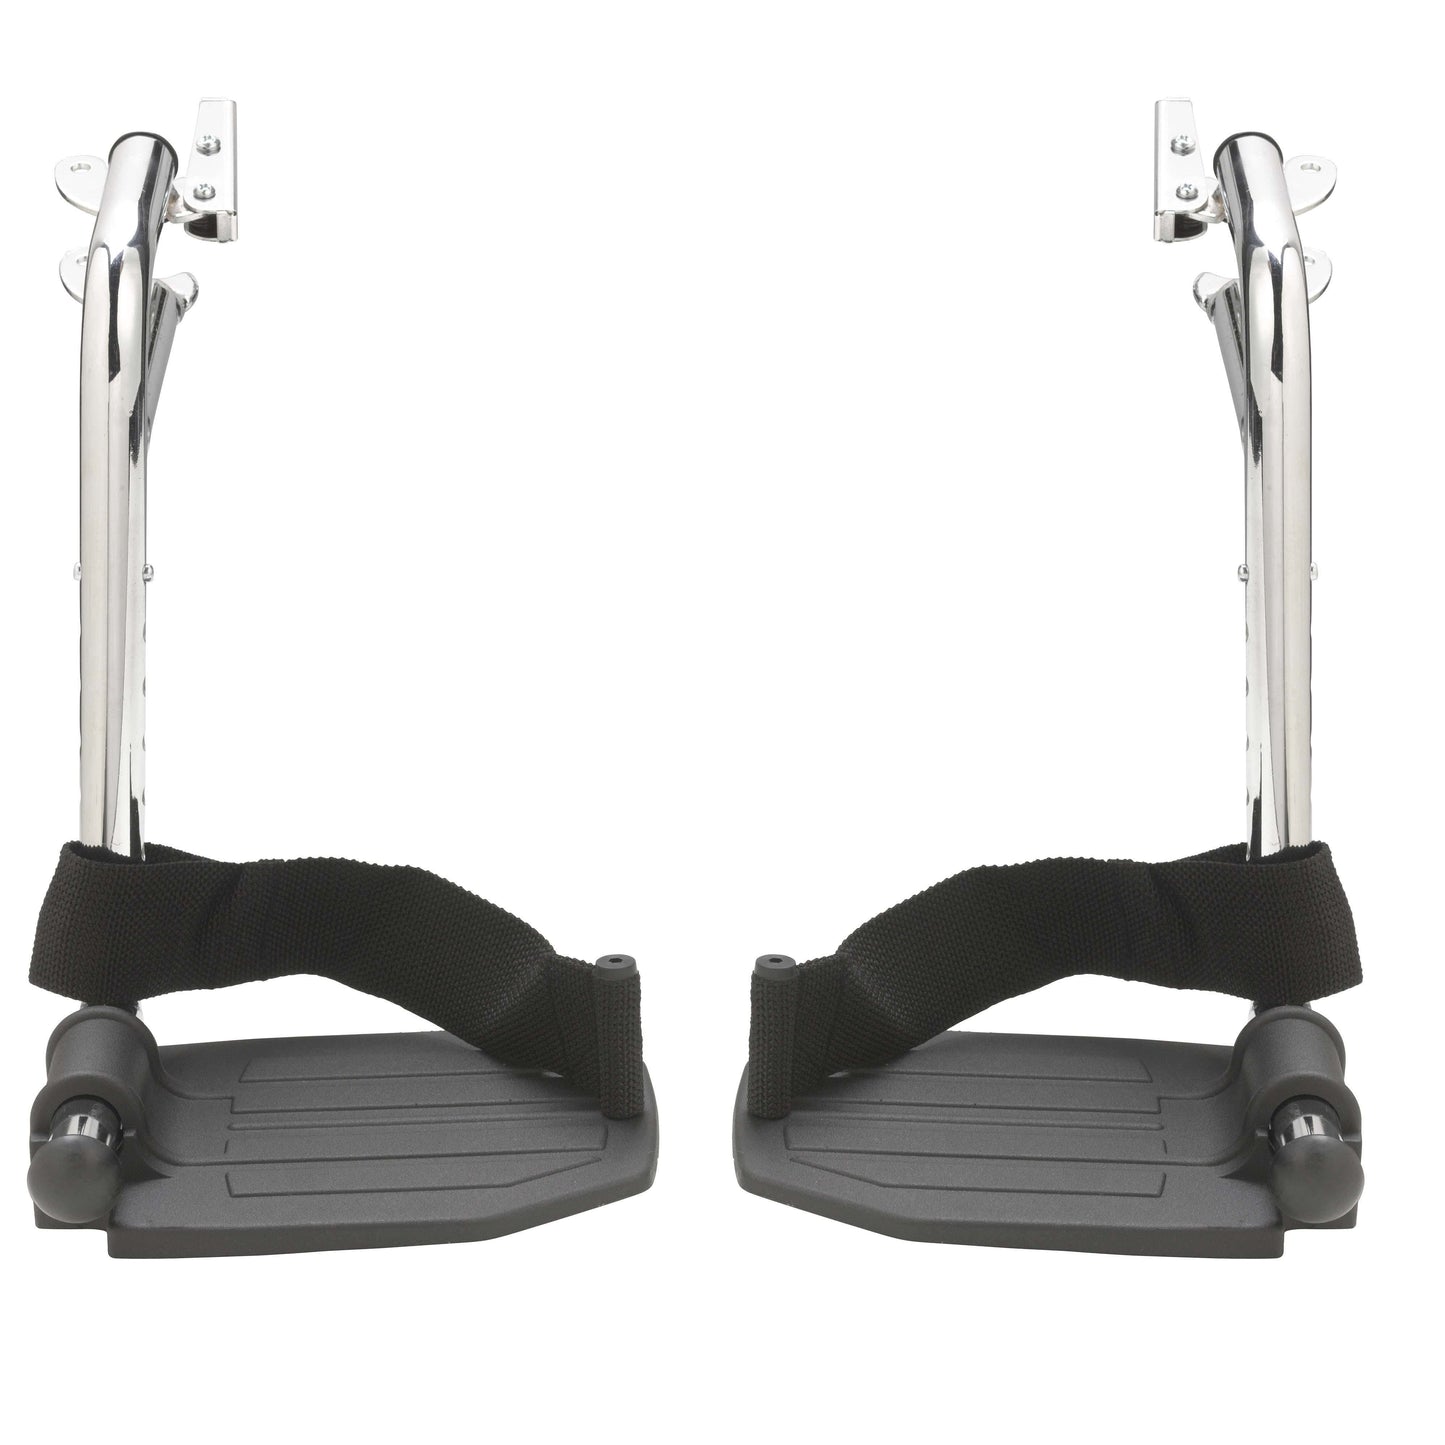 Drive stdsf-tf Chrome Swing Away Footrests with Aluminum Footplates, 1 Pair